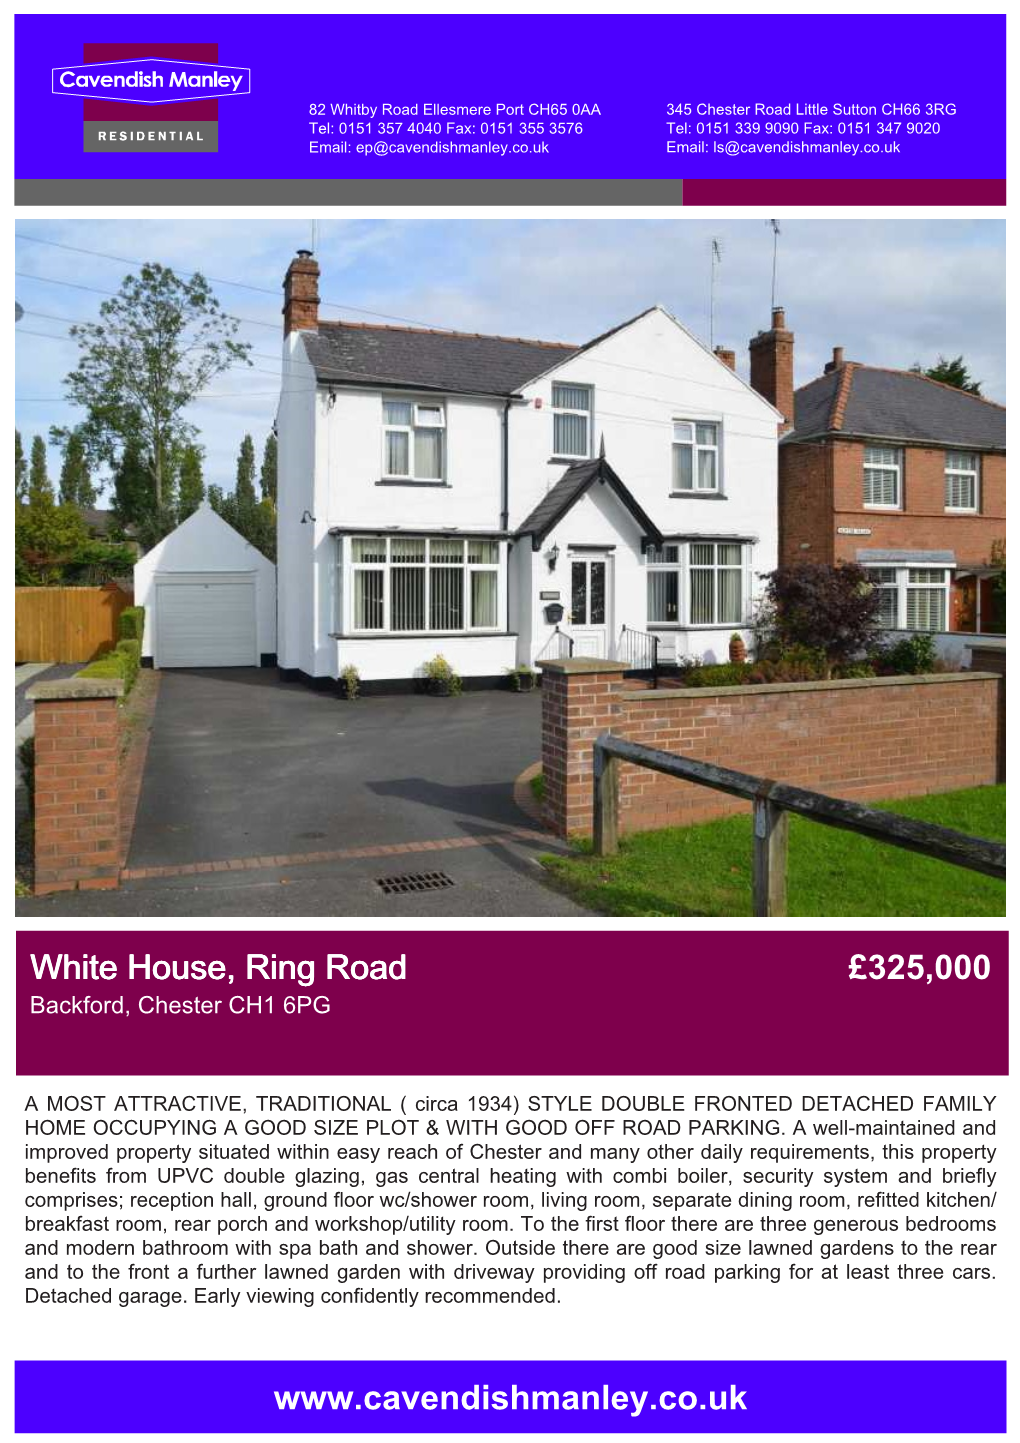 White House, Ring Road £325,000